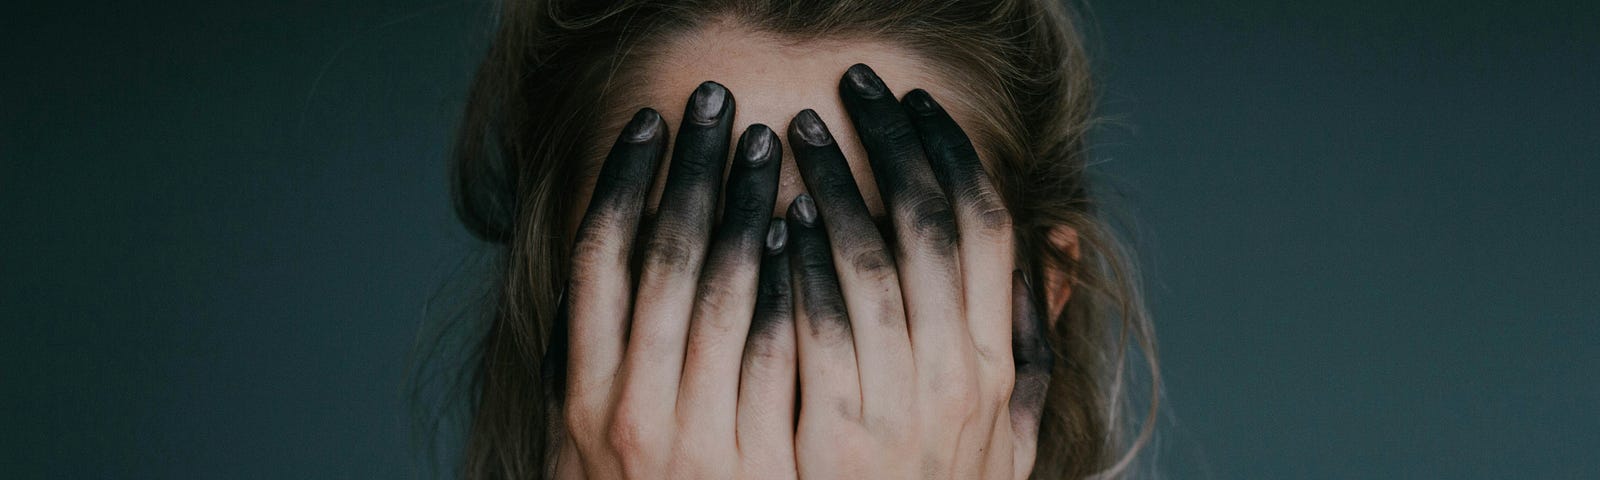 Girl covering her face with blackened fingers